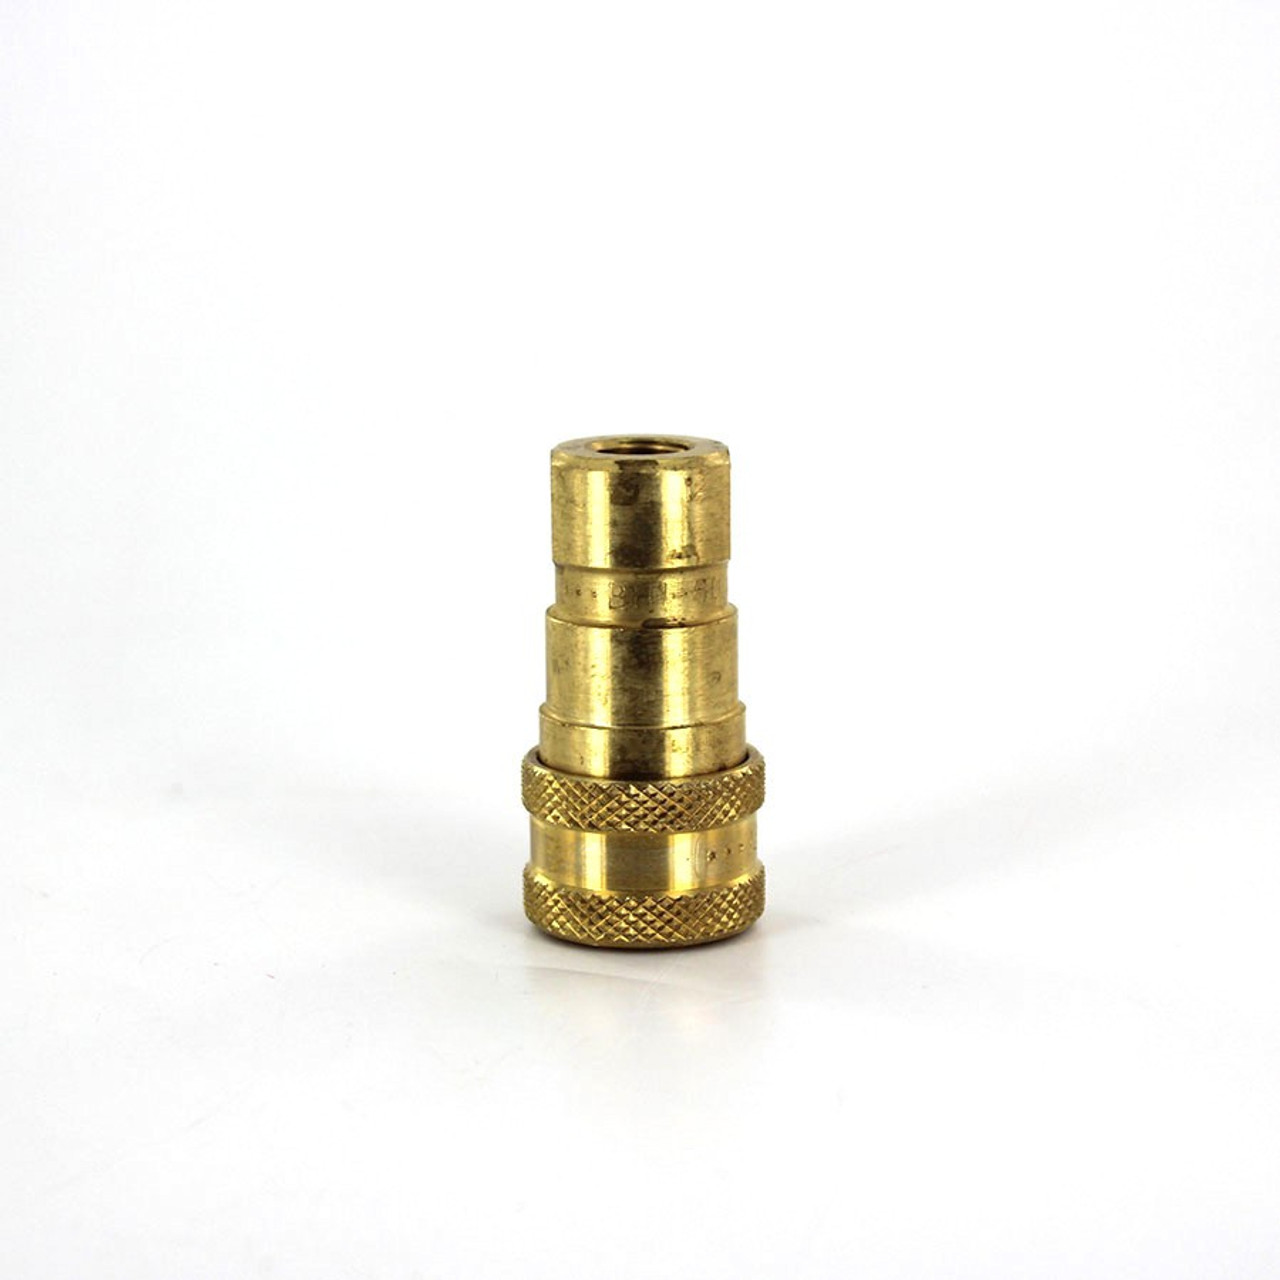 Parker Bh1-60 60 Series Coupler Brass 1/8" Body Size 1/8" Npt Female Port Poppet-Type Valve General Purpose 27.4" Hg Vacuum-1000Psi (69Bar) Wp Nitrile Seals Temp Range Degrees F: (-40 To +250) Conforms To Iso 7241 Series B Standards